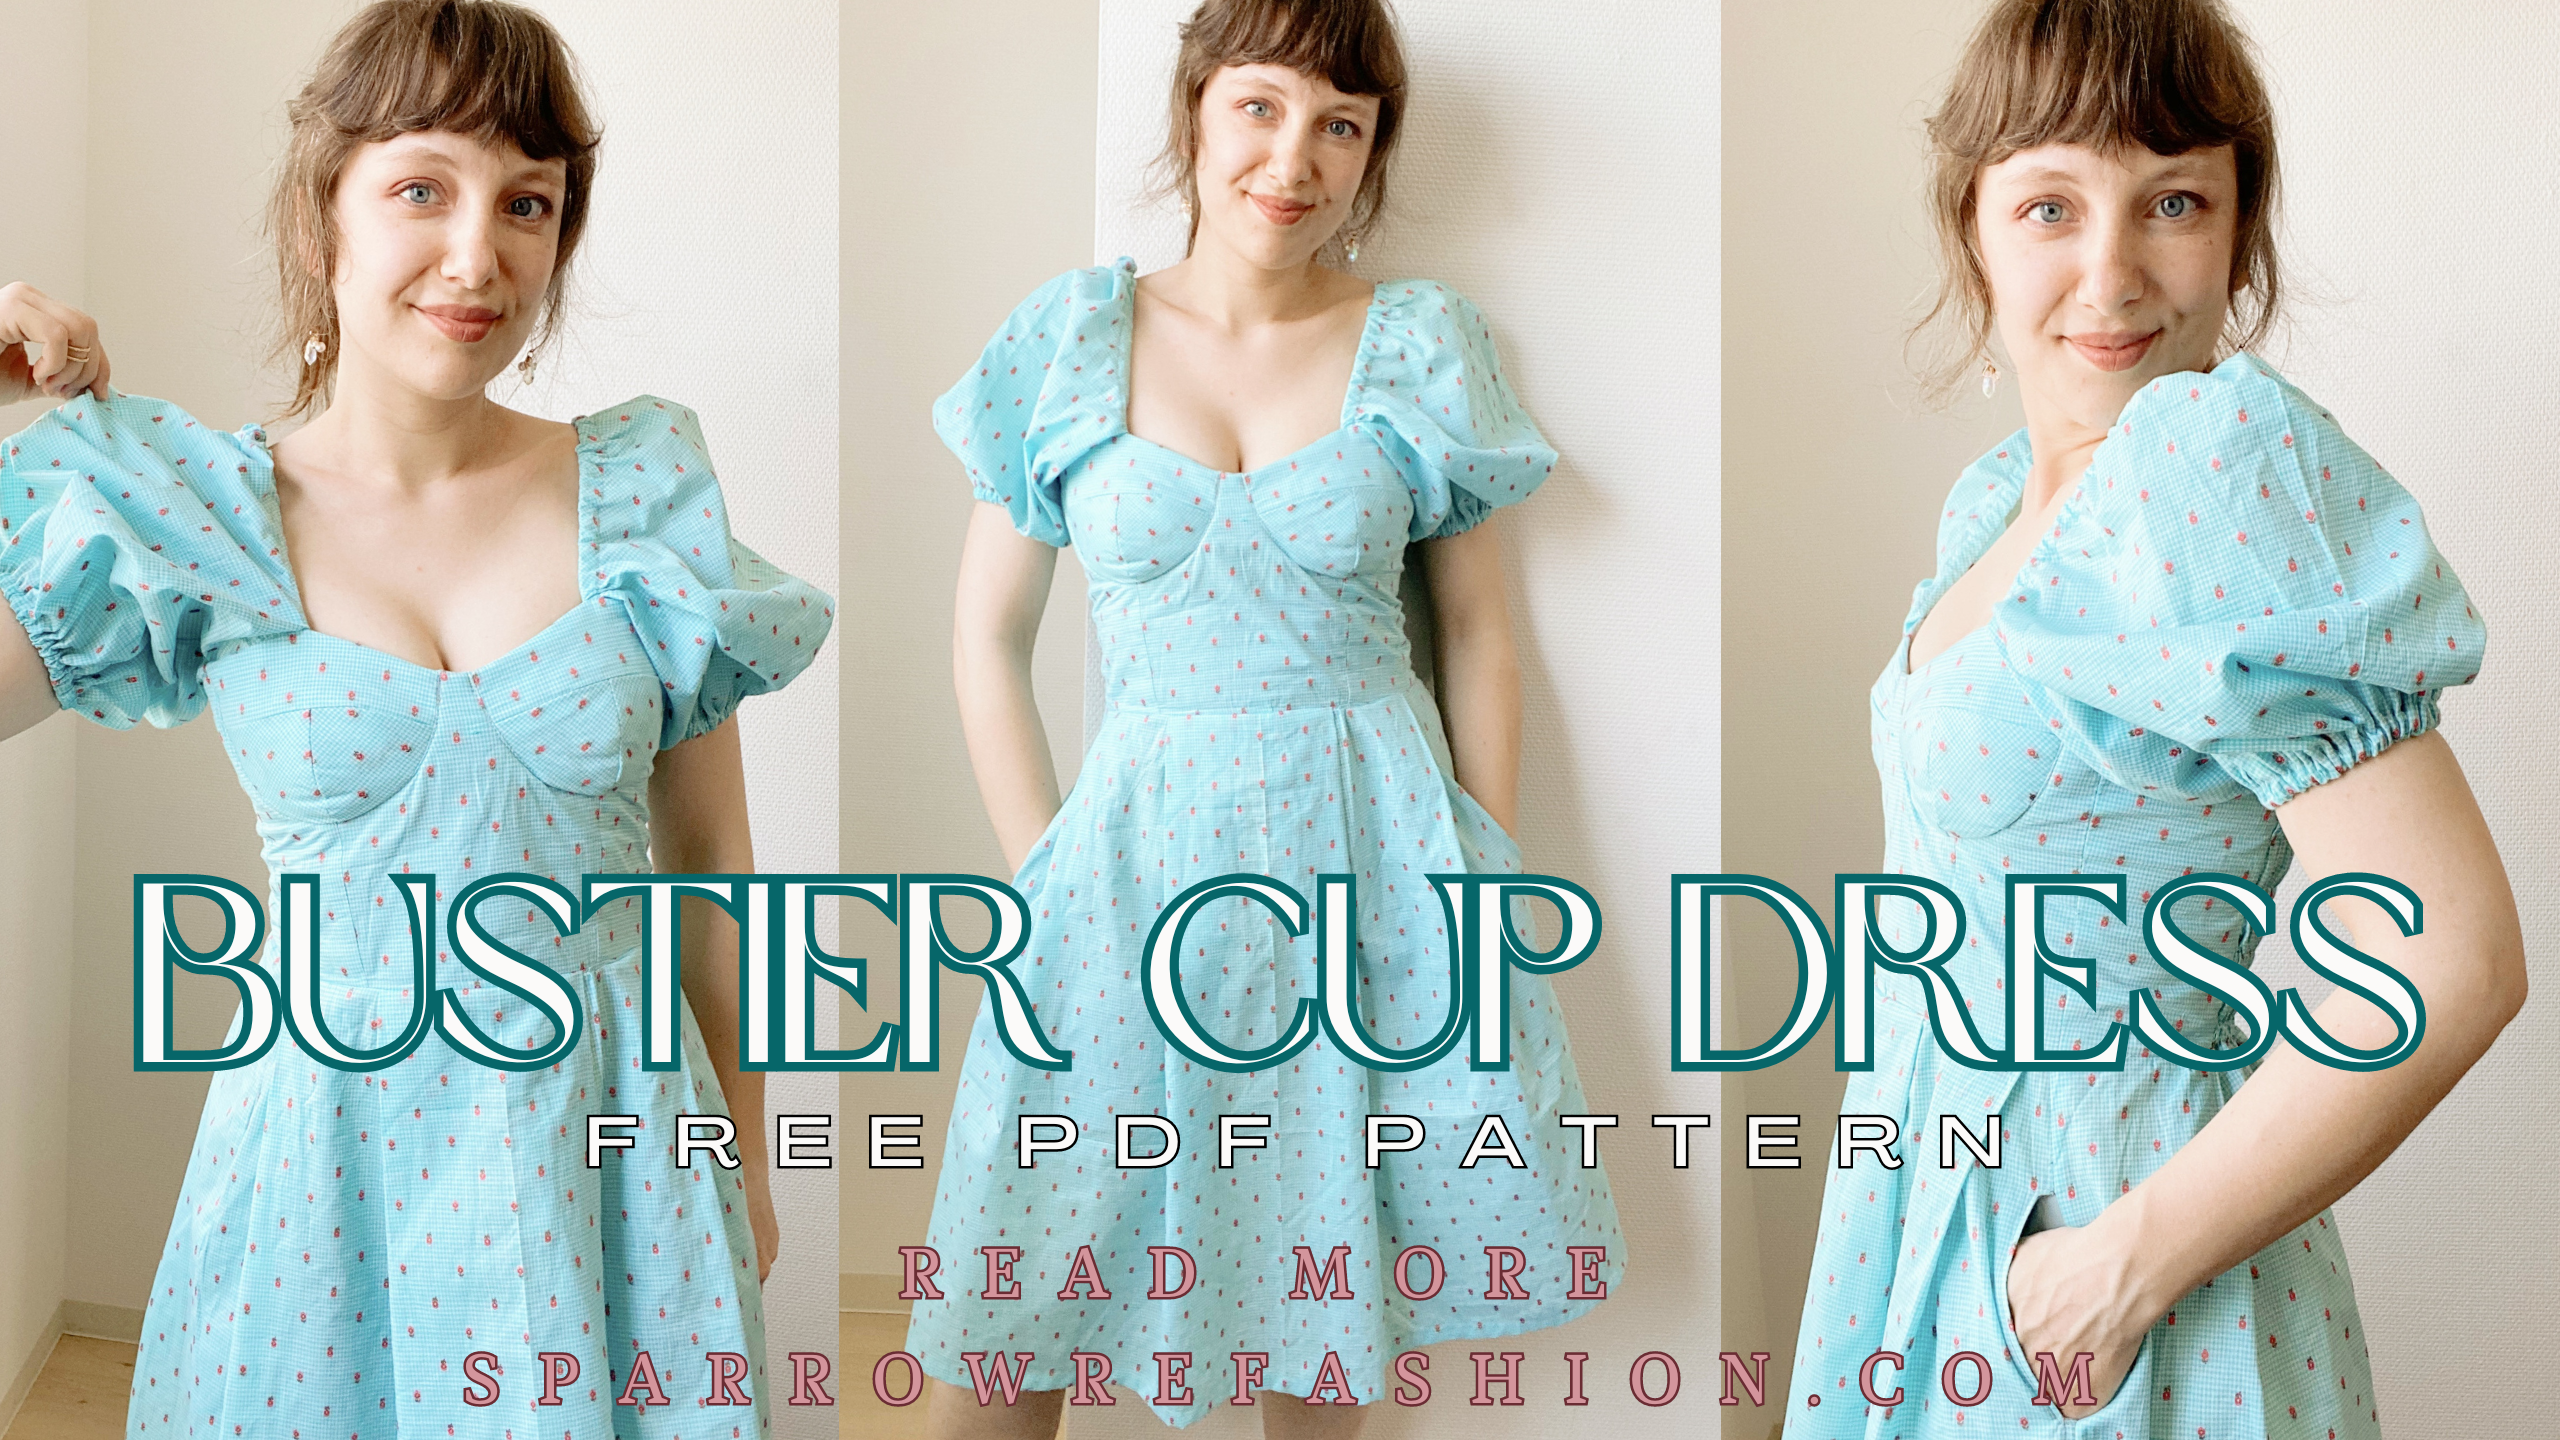 Bustier Cup Dress SEWING TUTORIAL  Free PDF Pattern - Sparrow Refashion: A  Blog for Sewing Lovers and DIY Enthusiasts